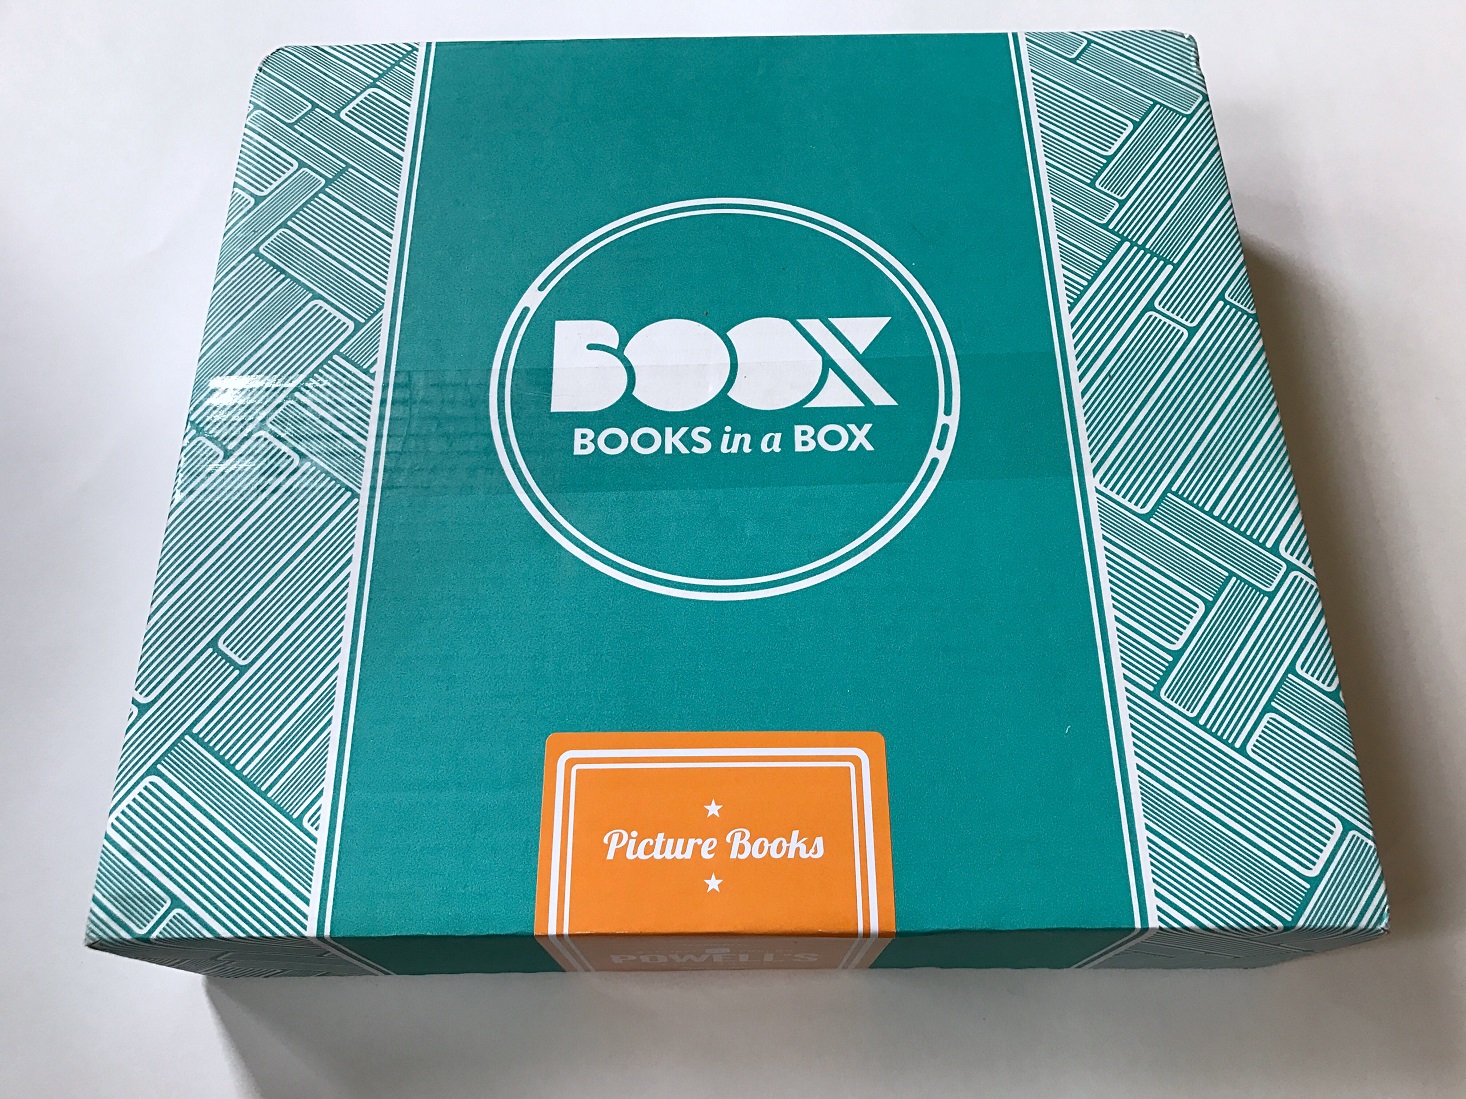 Boox Volume 6 Subscription Box Review – January 2018